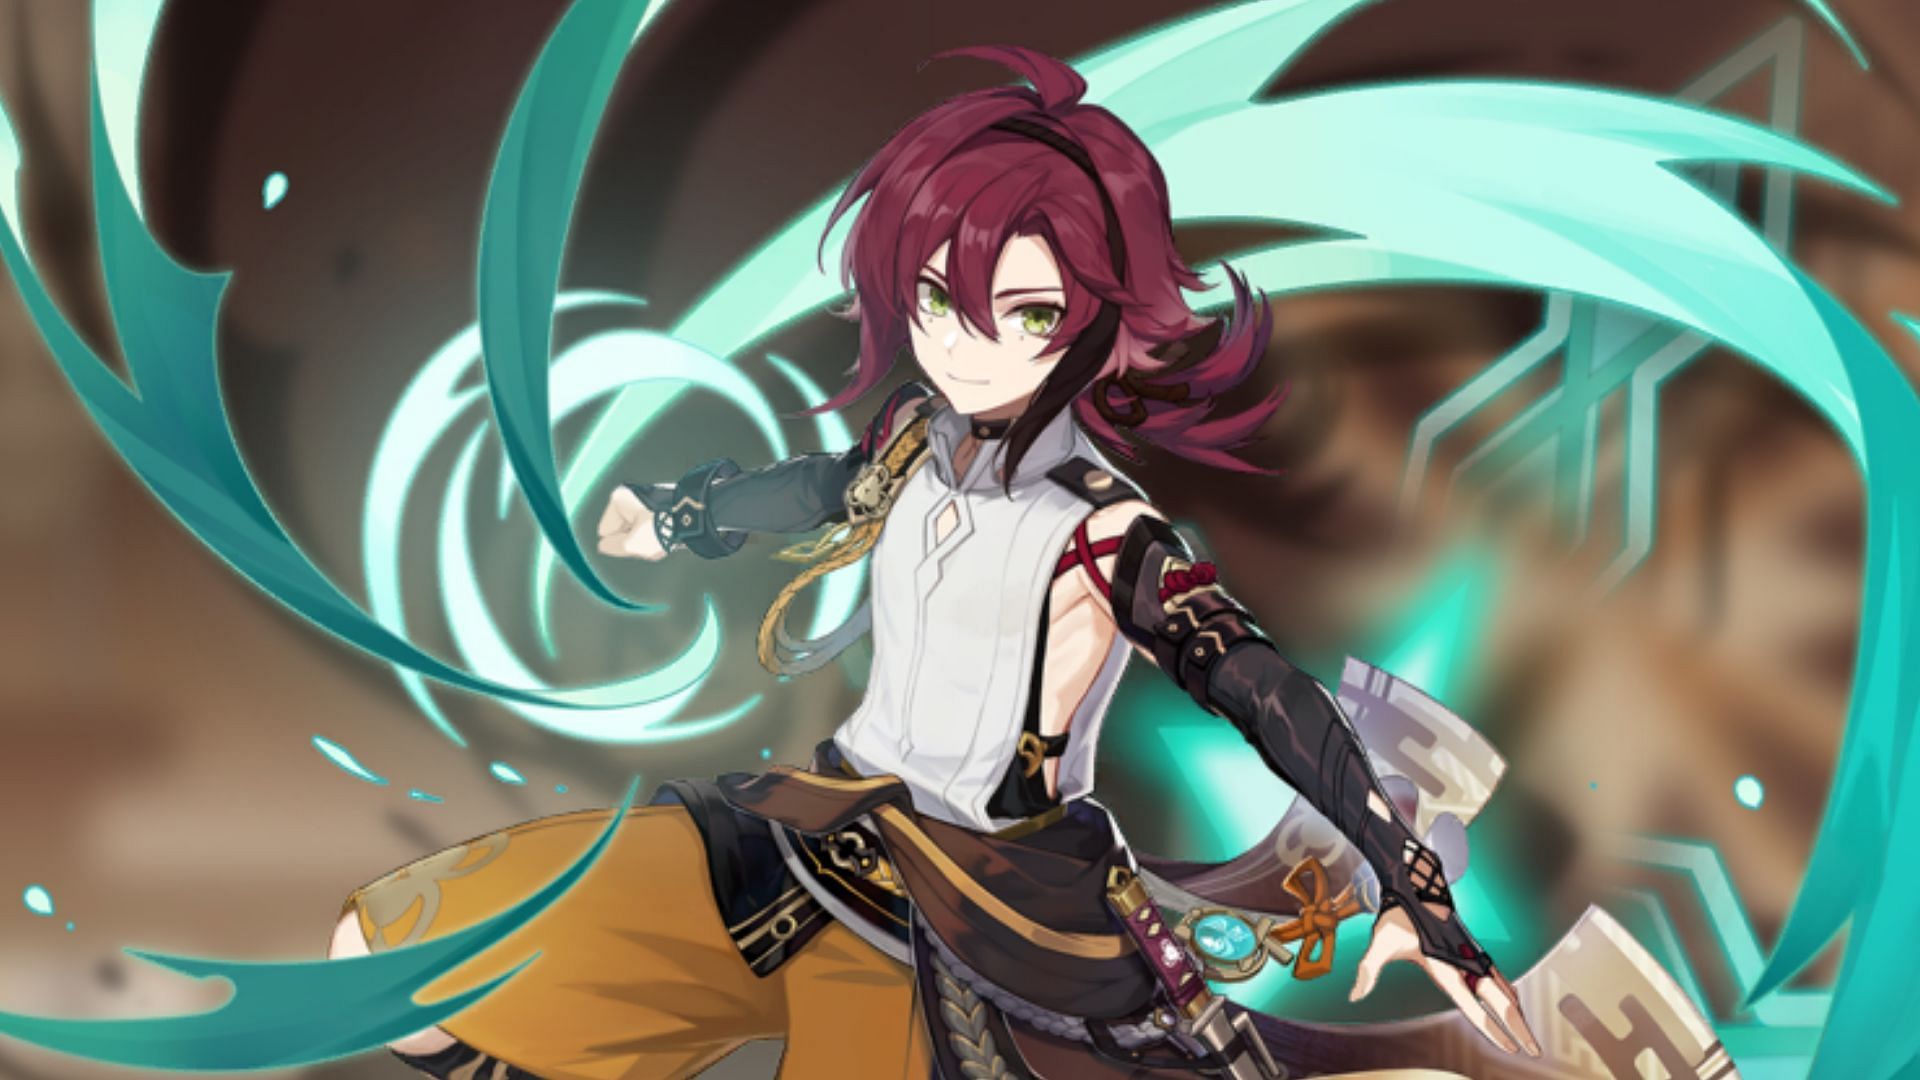 New 4-star Anemo character, Shikanoin Heizou to release in patch 2.8 (Image via HoYoverse)